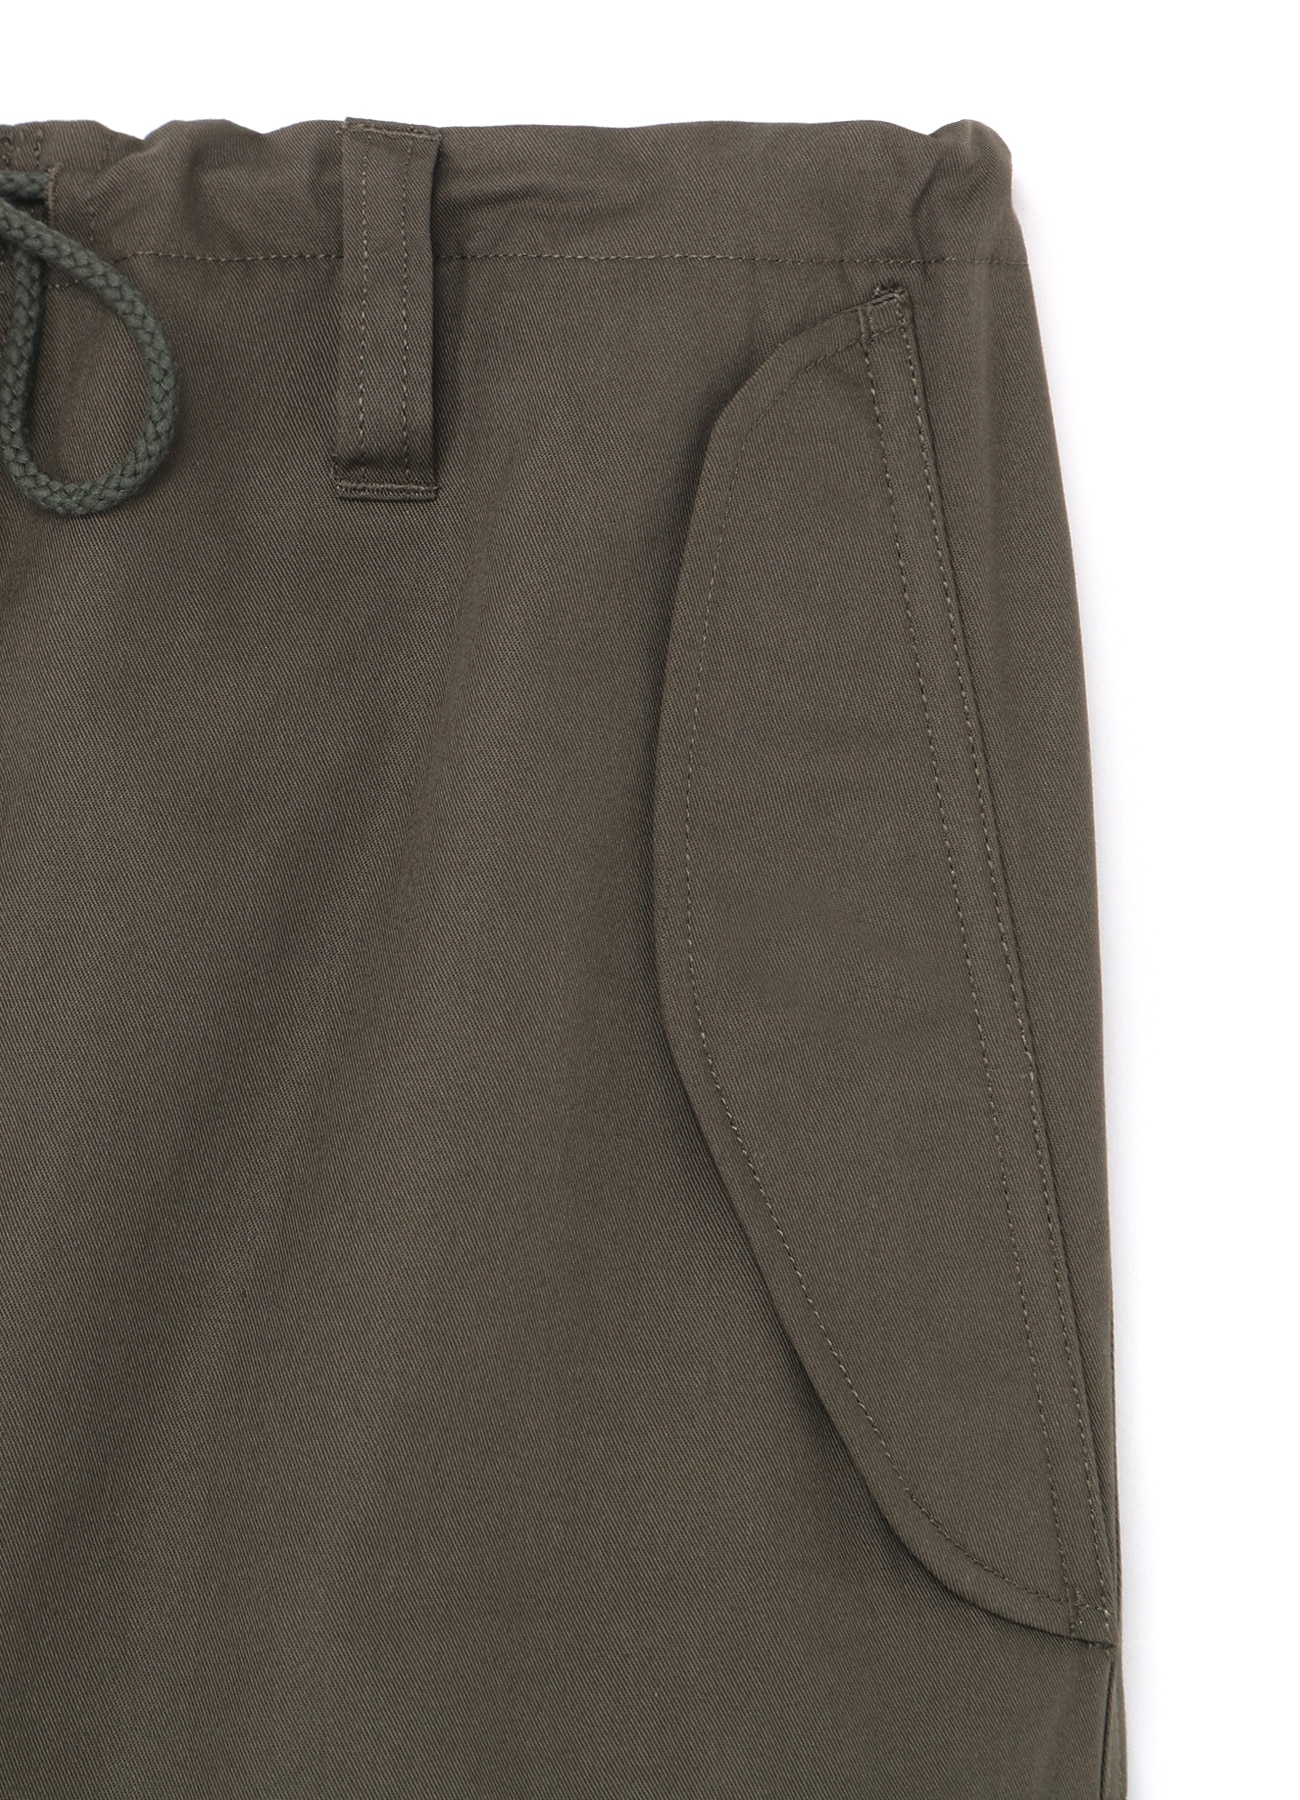 POLYESTER/COTTON TWILL CARGO PANTS(S KHAKI): Y's for men｜WILDSIDE YOHJI  YAMAMOTO [Official